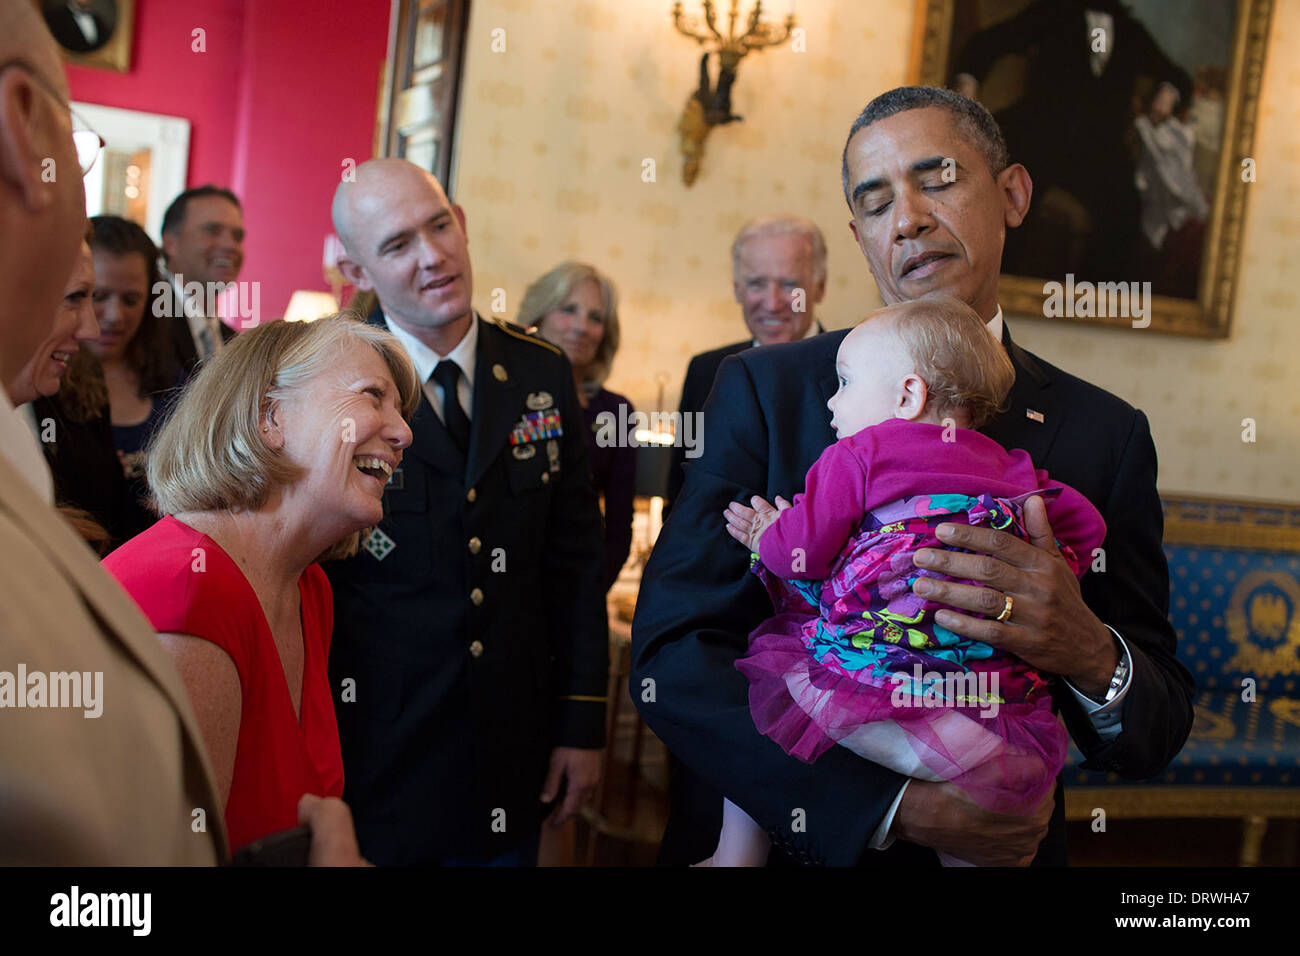 US President Barack Obama visits with U.S. Army Staff Sergeant Ty Carter and family in the Blue Room of the White House prior to the Medal of Honor ceremony honoring Carter August 26, 2013 in Washington, DC. The President holds Carter's daughter Sehara. Stock Photo